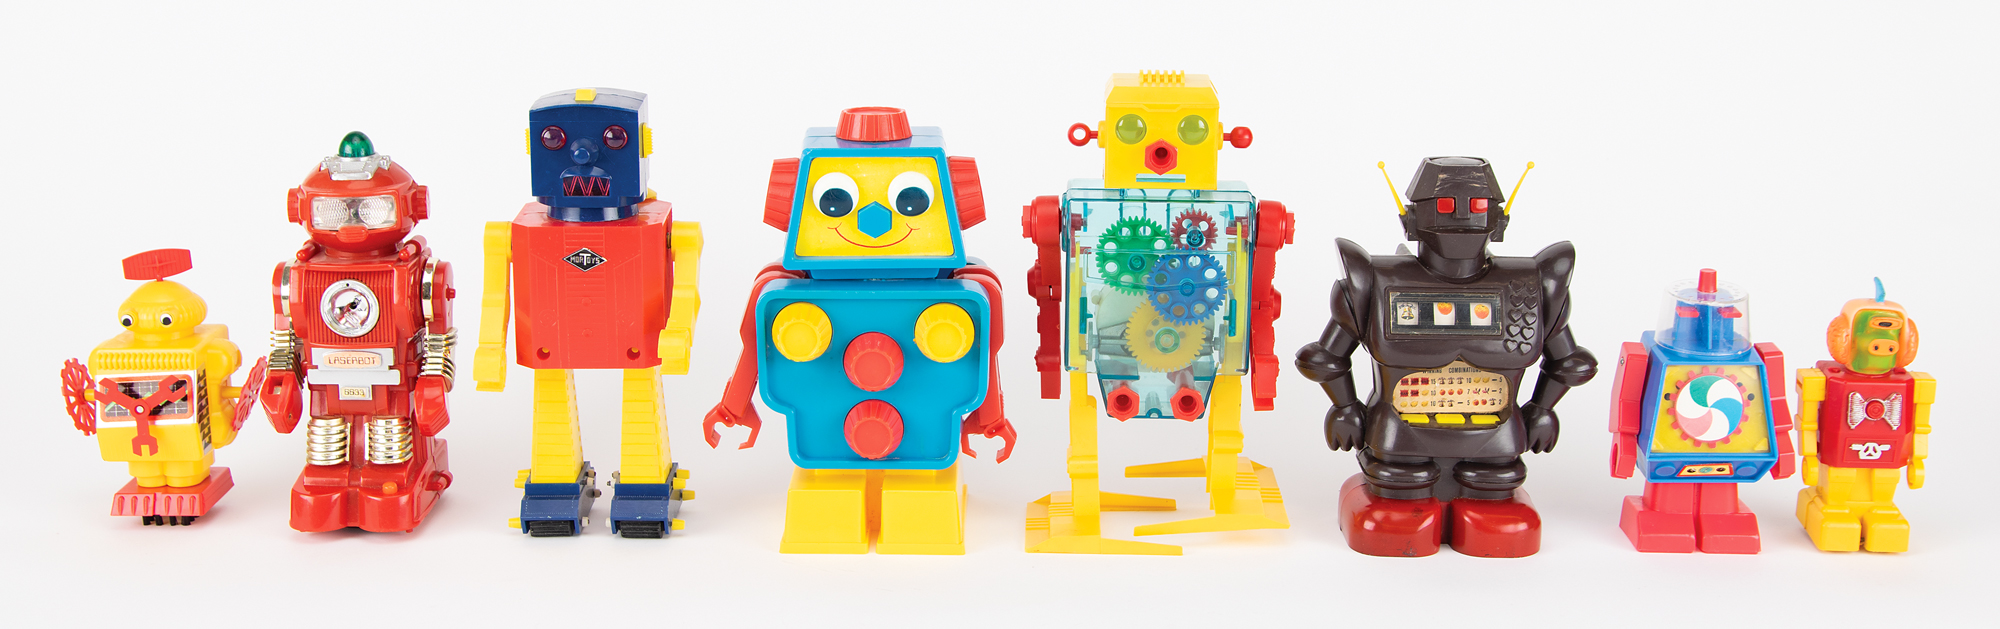 Lot #211 Vintage Lot of (8) Second Generation Battery Powered and Wind-up Toy Robots from the collection of Andres Serrano